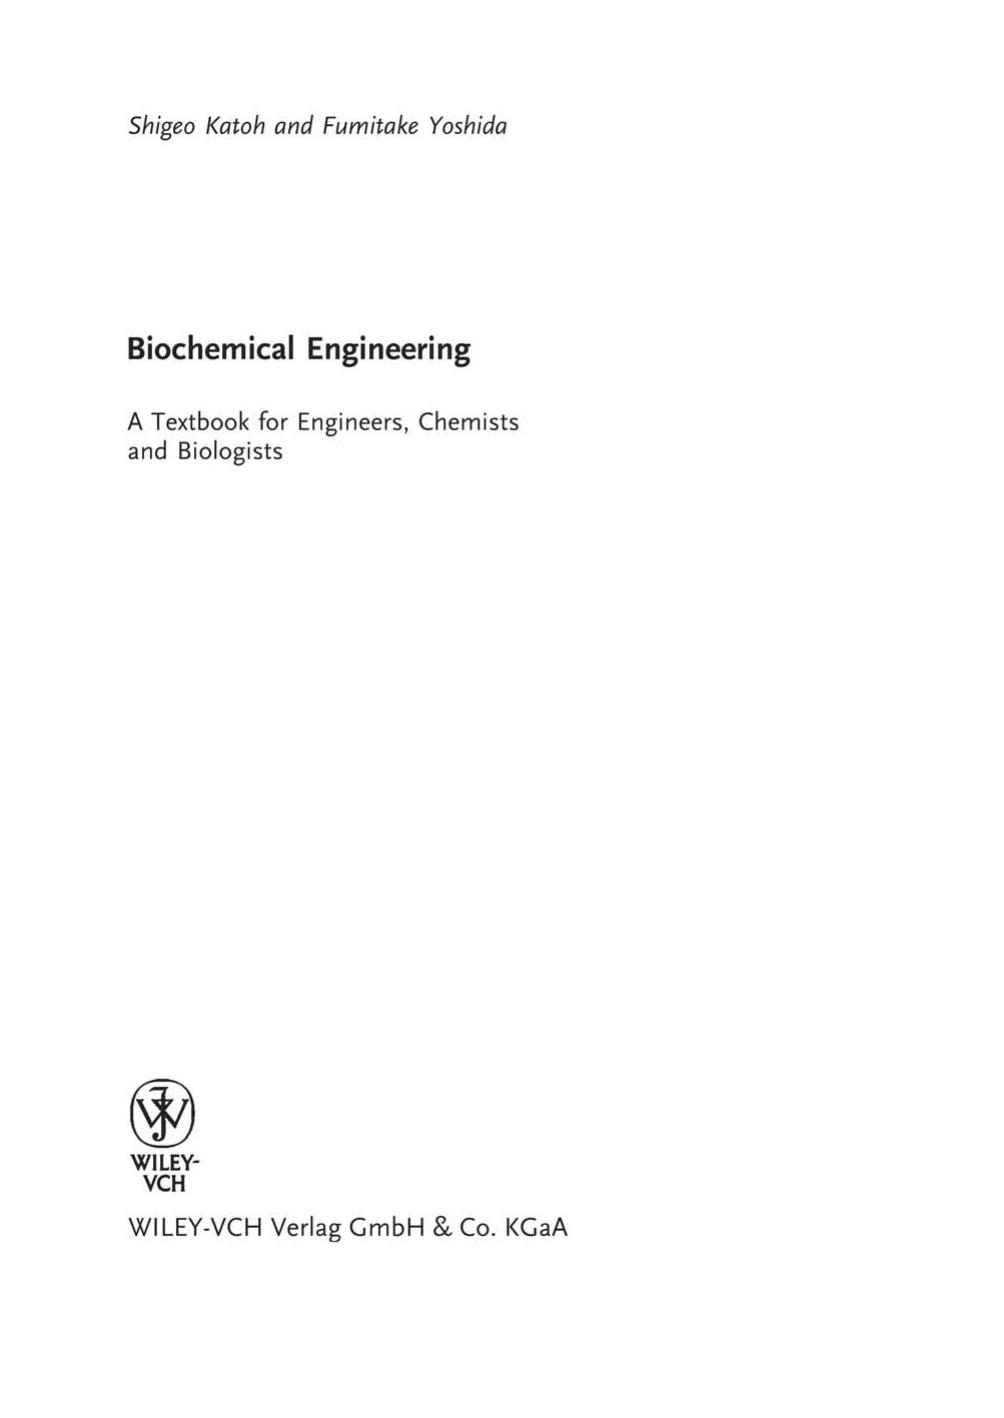 Biochemical Engineering~ A Textbook for Engineers, Chemists and Biologists               2009